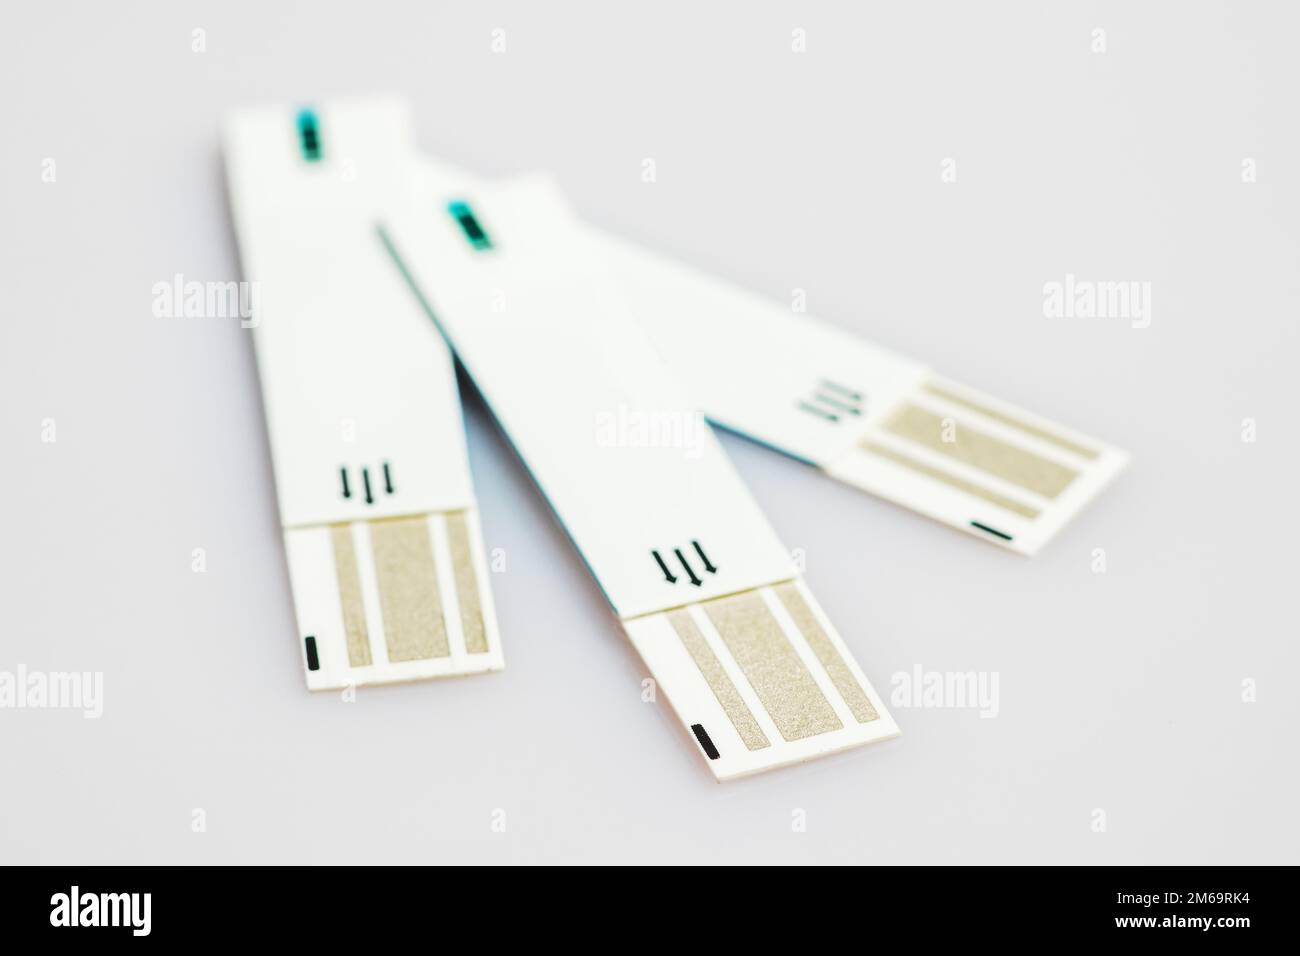 Glucometer test strips on a white background. Stock Photo